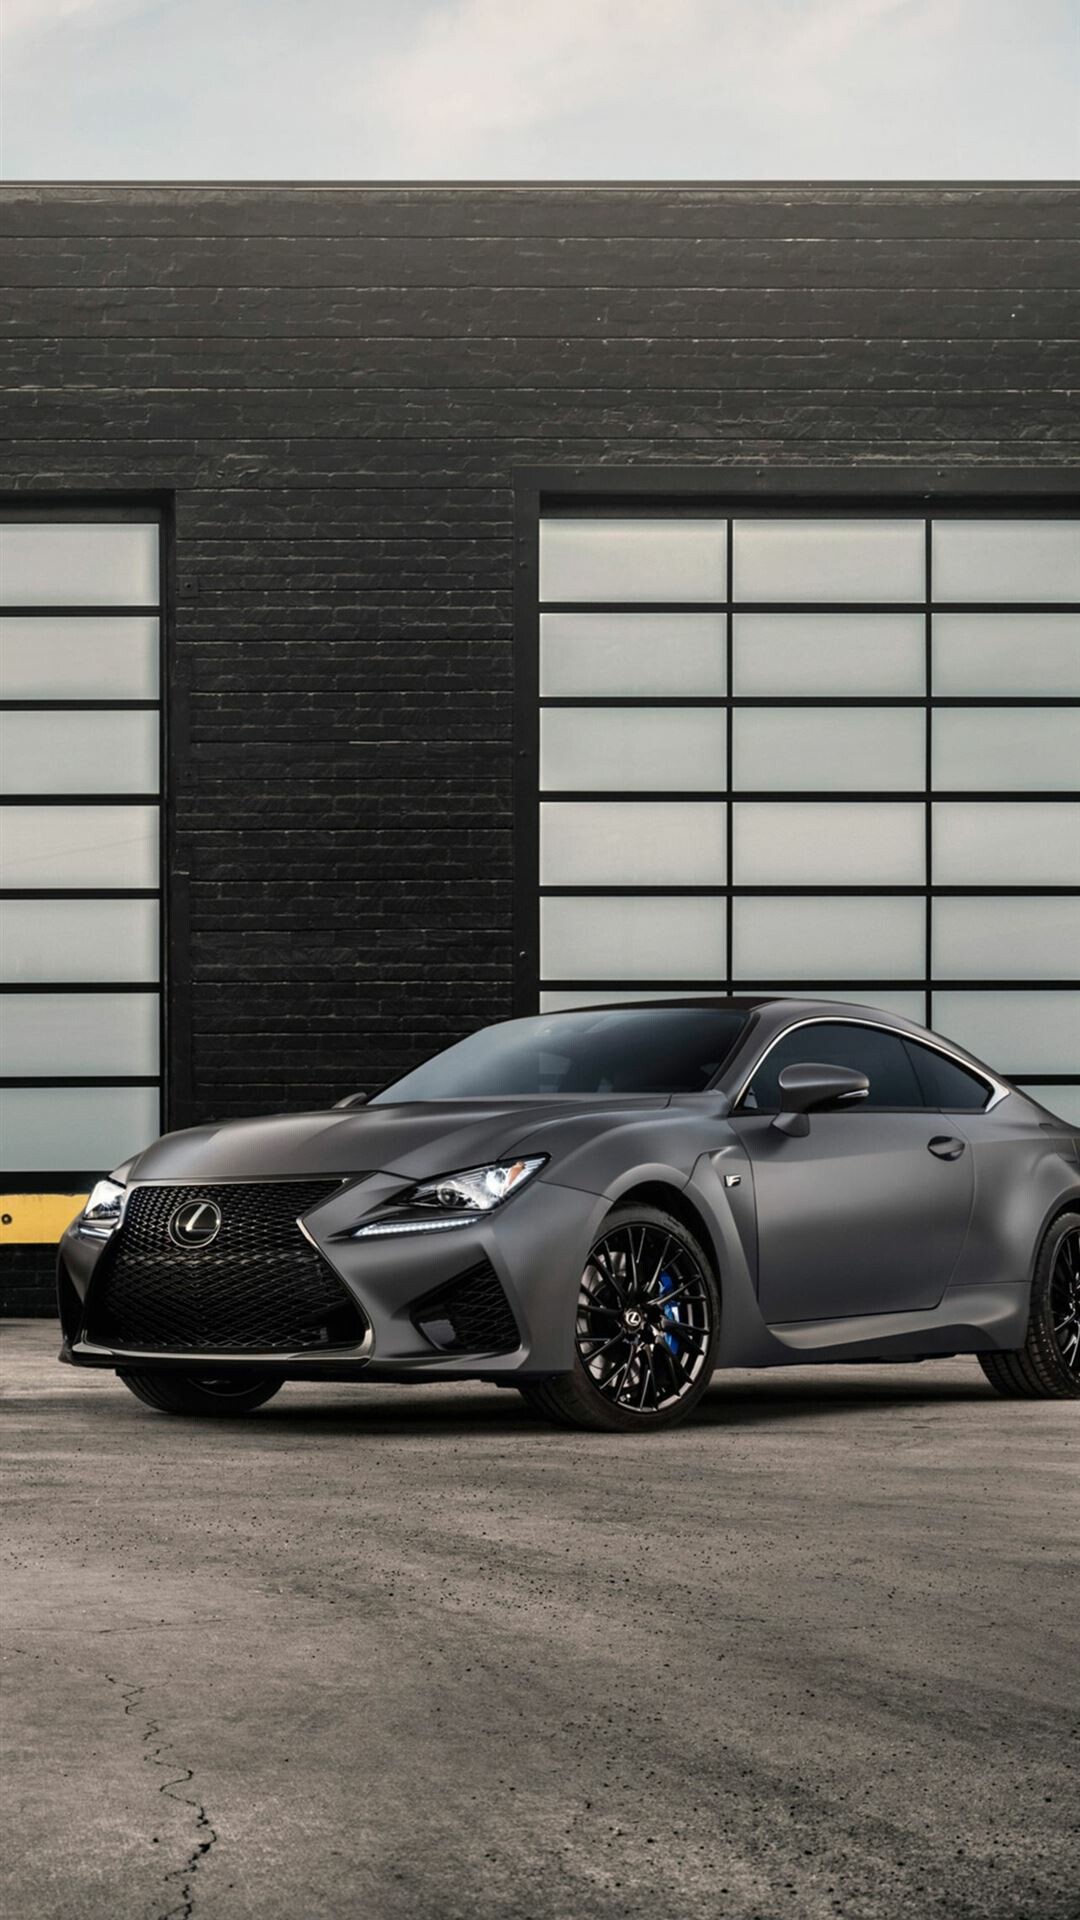 Lexus RC F, iPhone wallpapers, Free download, 1080x1920 Full HD Phone